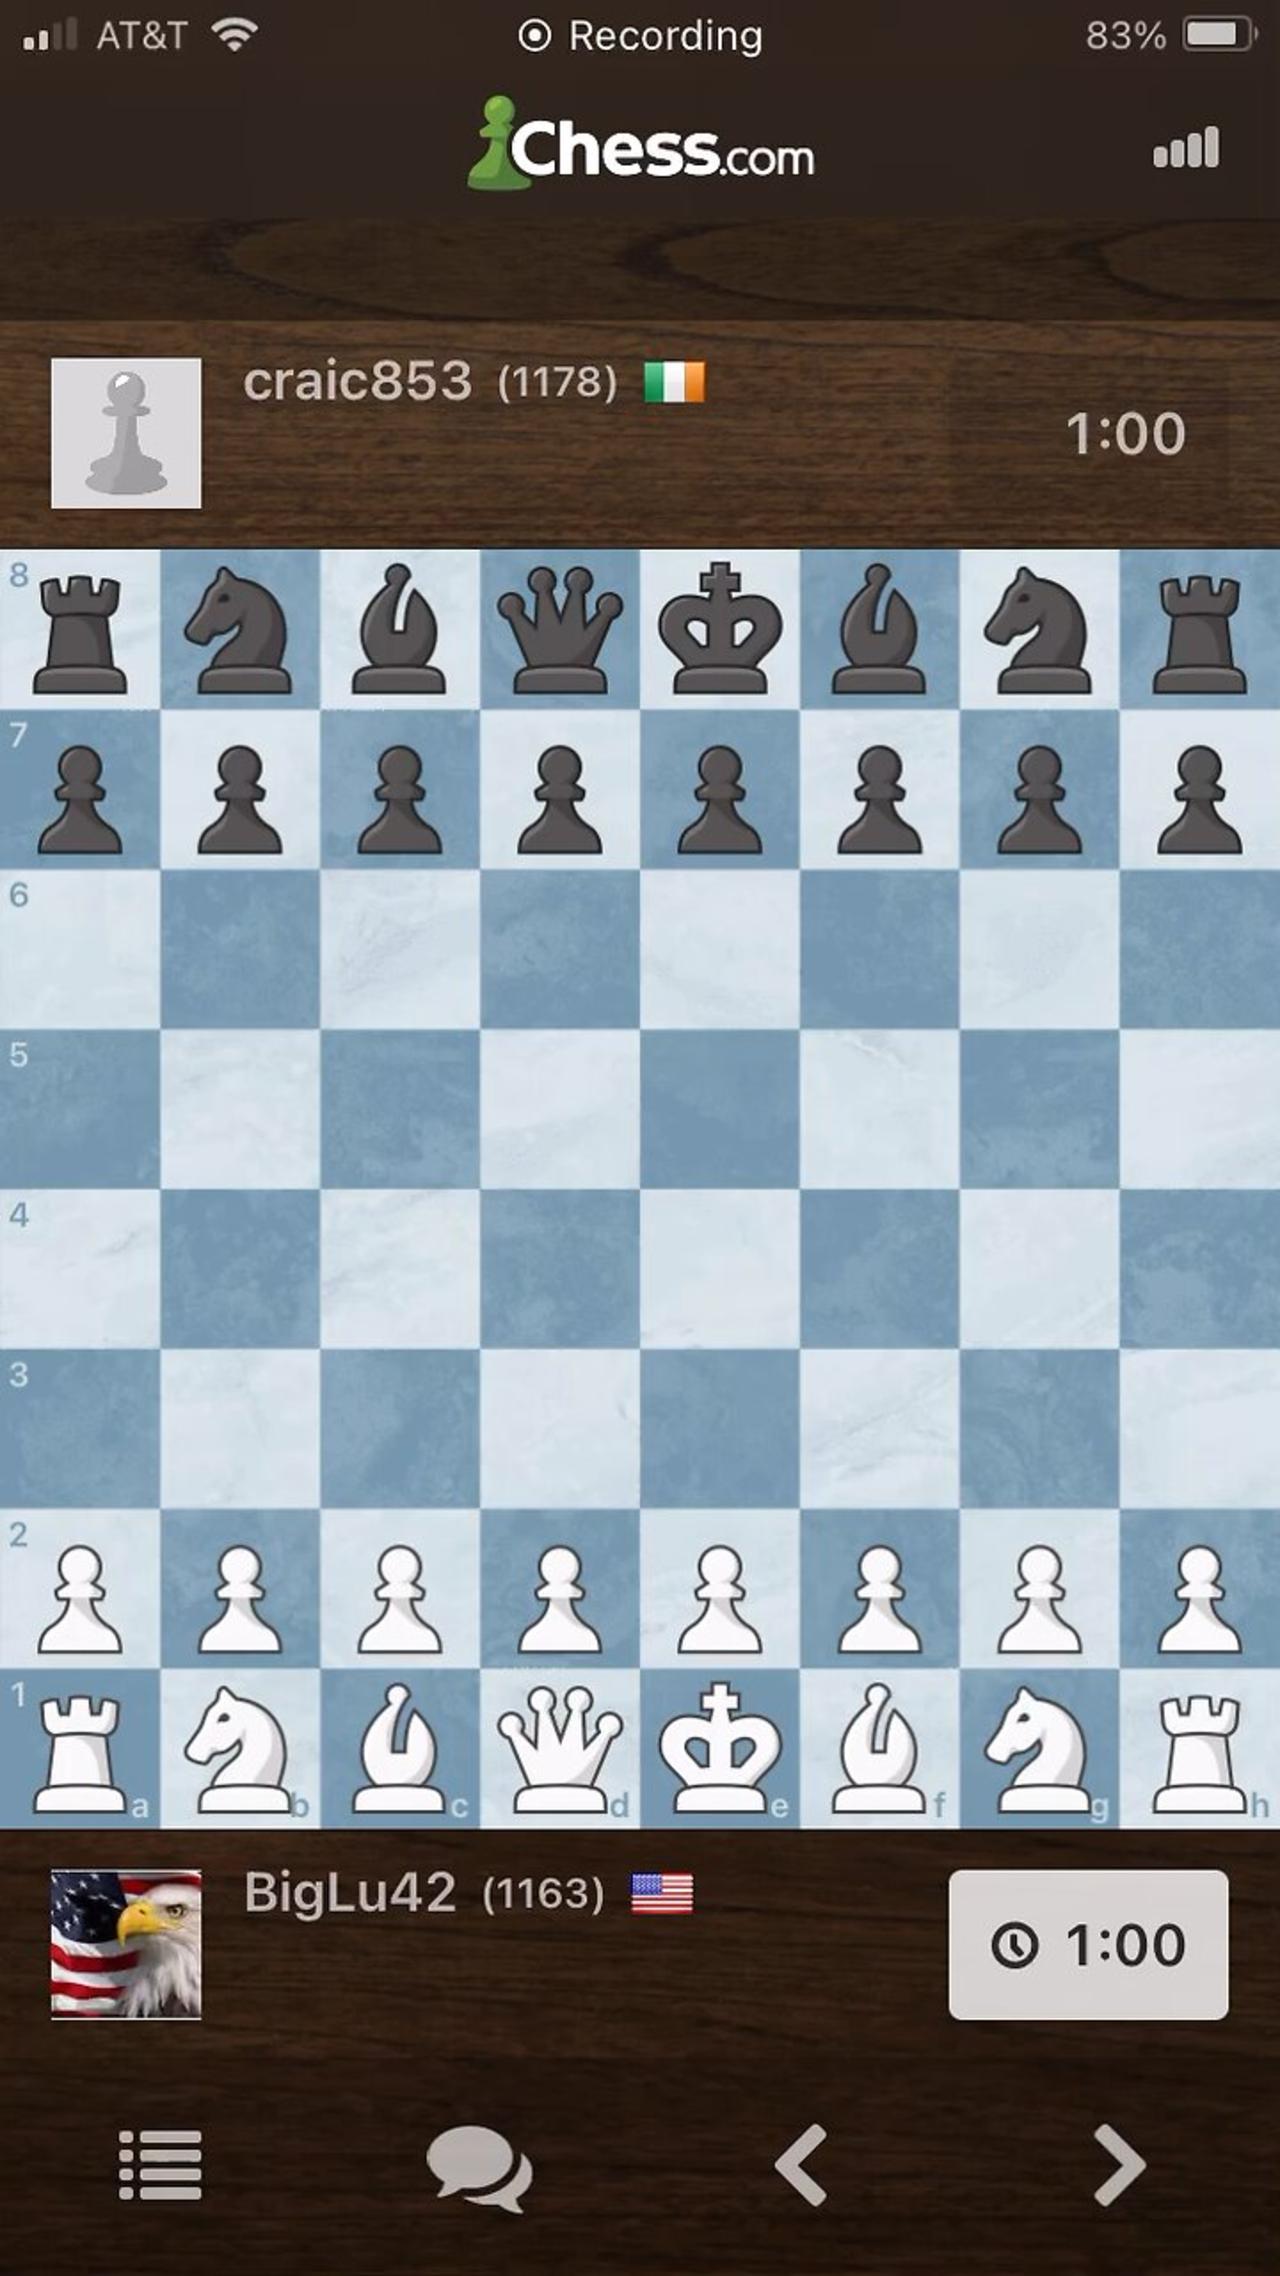 INTERMEDIATE BULLET CHESS GAMEPLAY - an opening advantage led to one’s ultimate demise